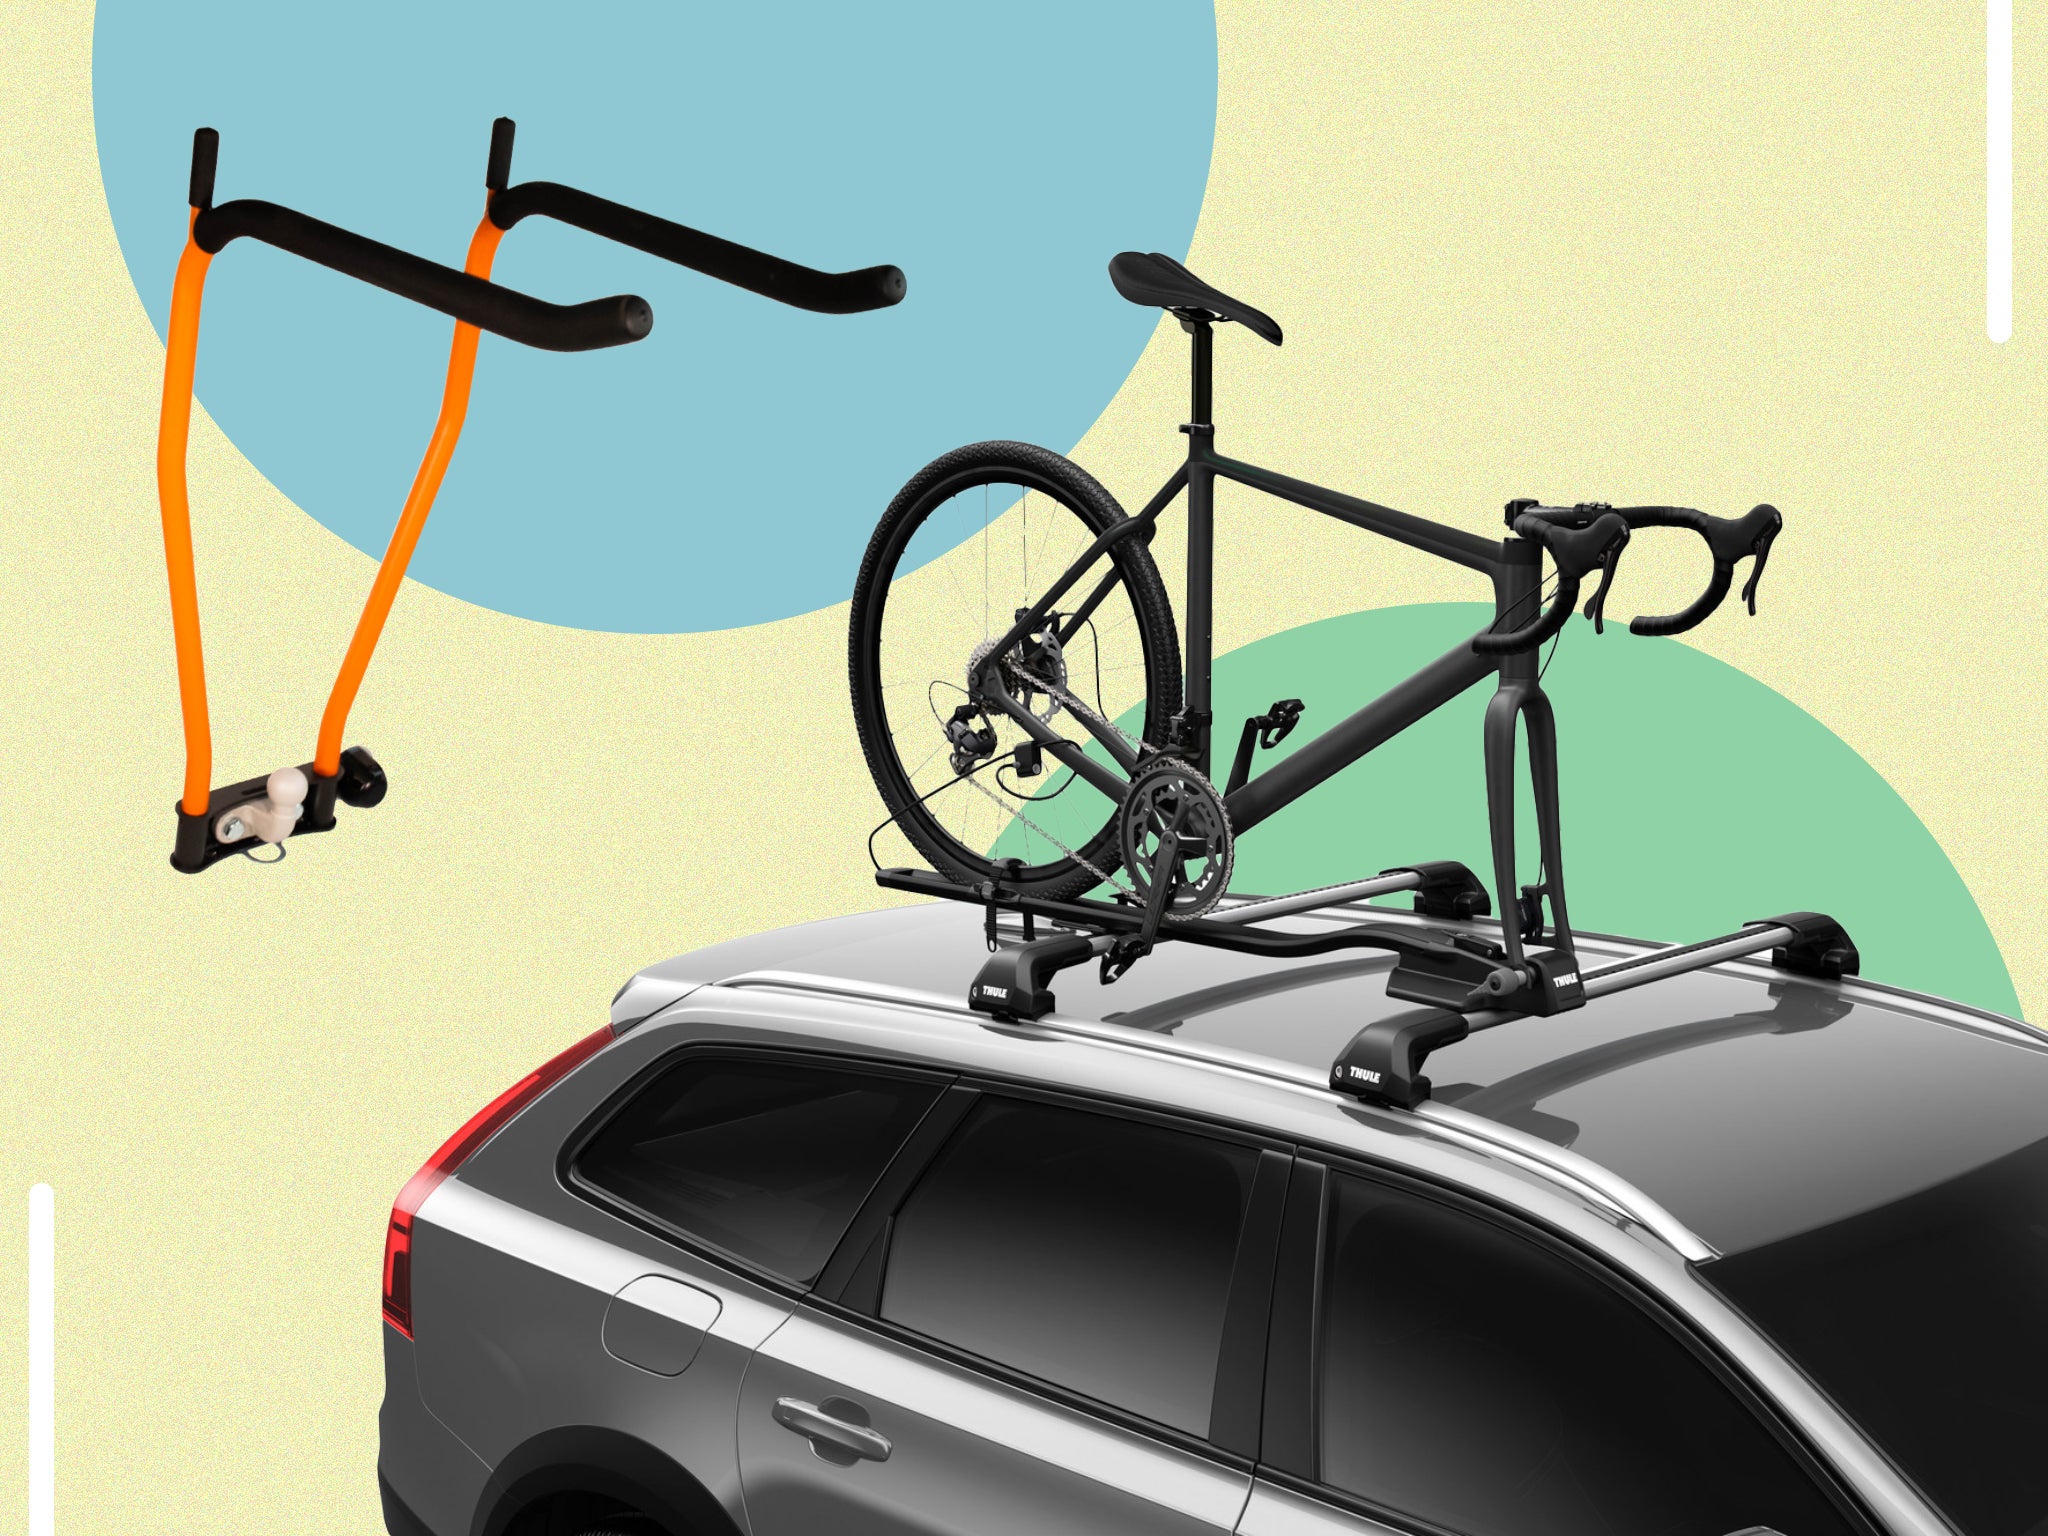 CAR ROOF BICYCLE BIKE CARRIER UPRIGHT MOUNTED LOCKING CYCLE RACK STORE STRONG UK